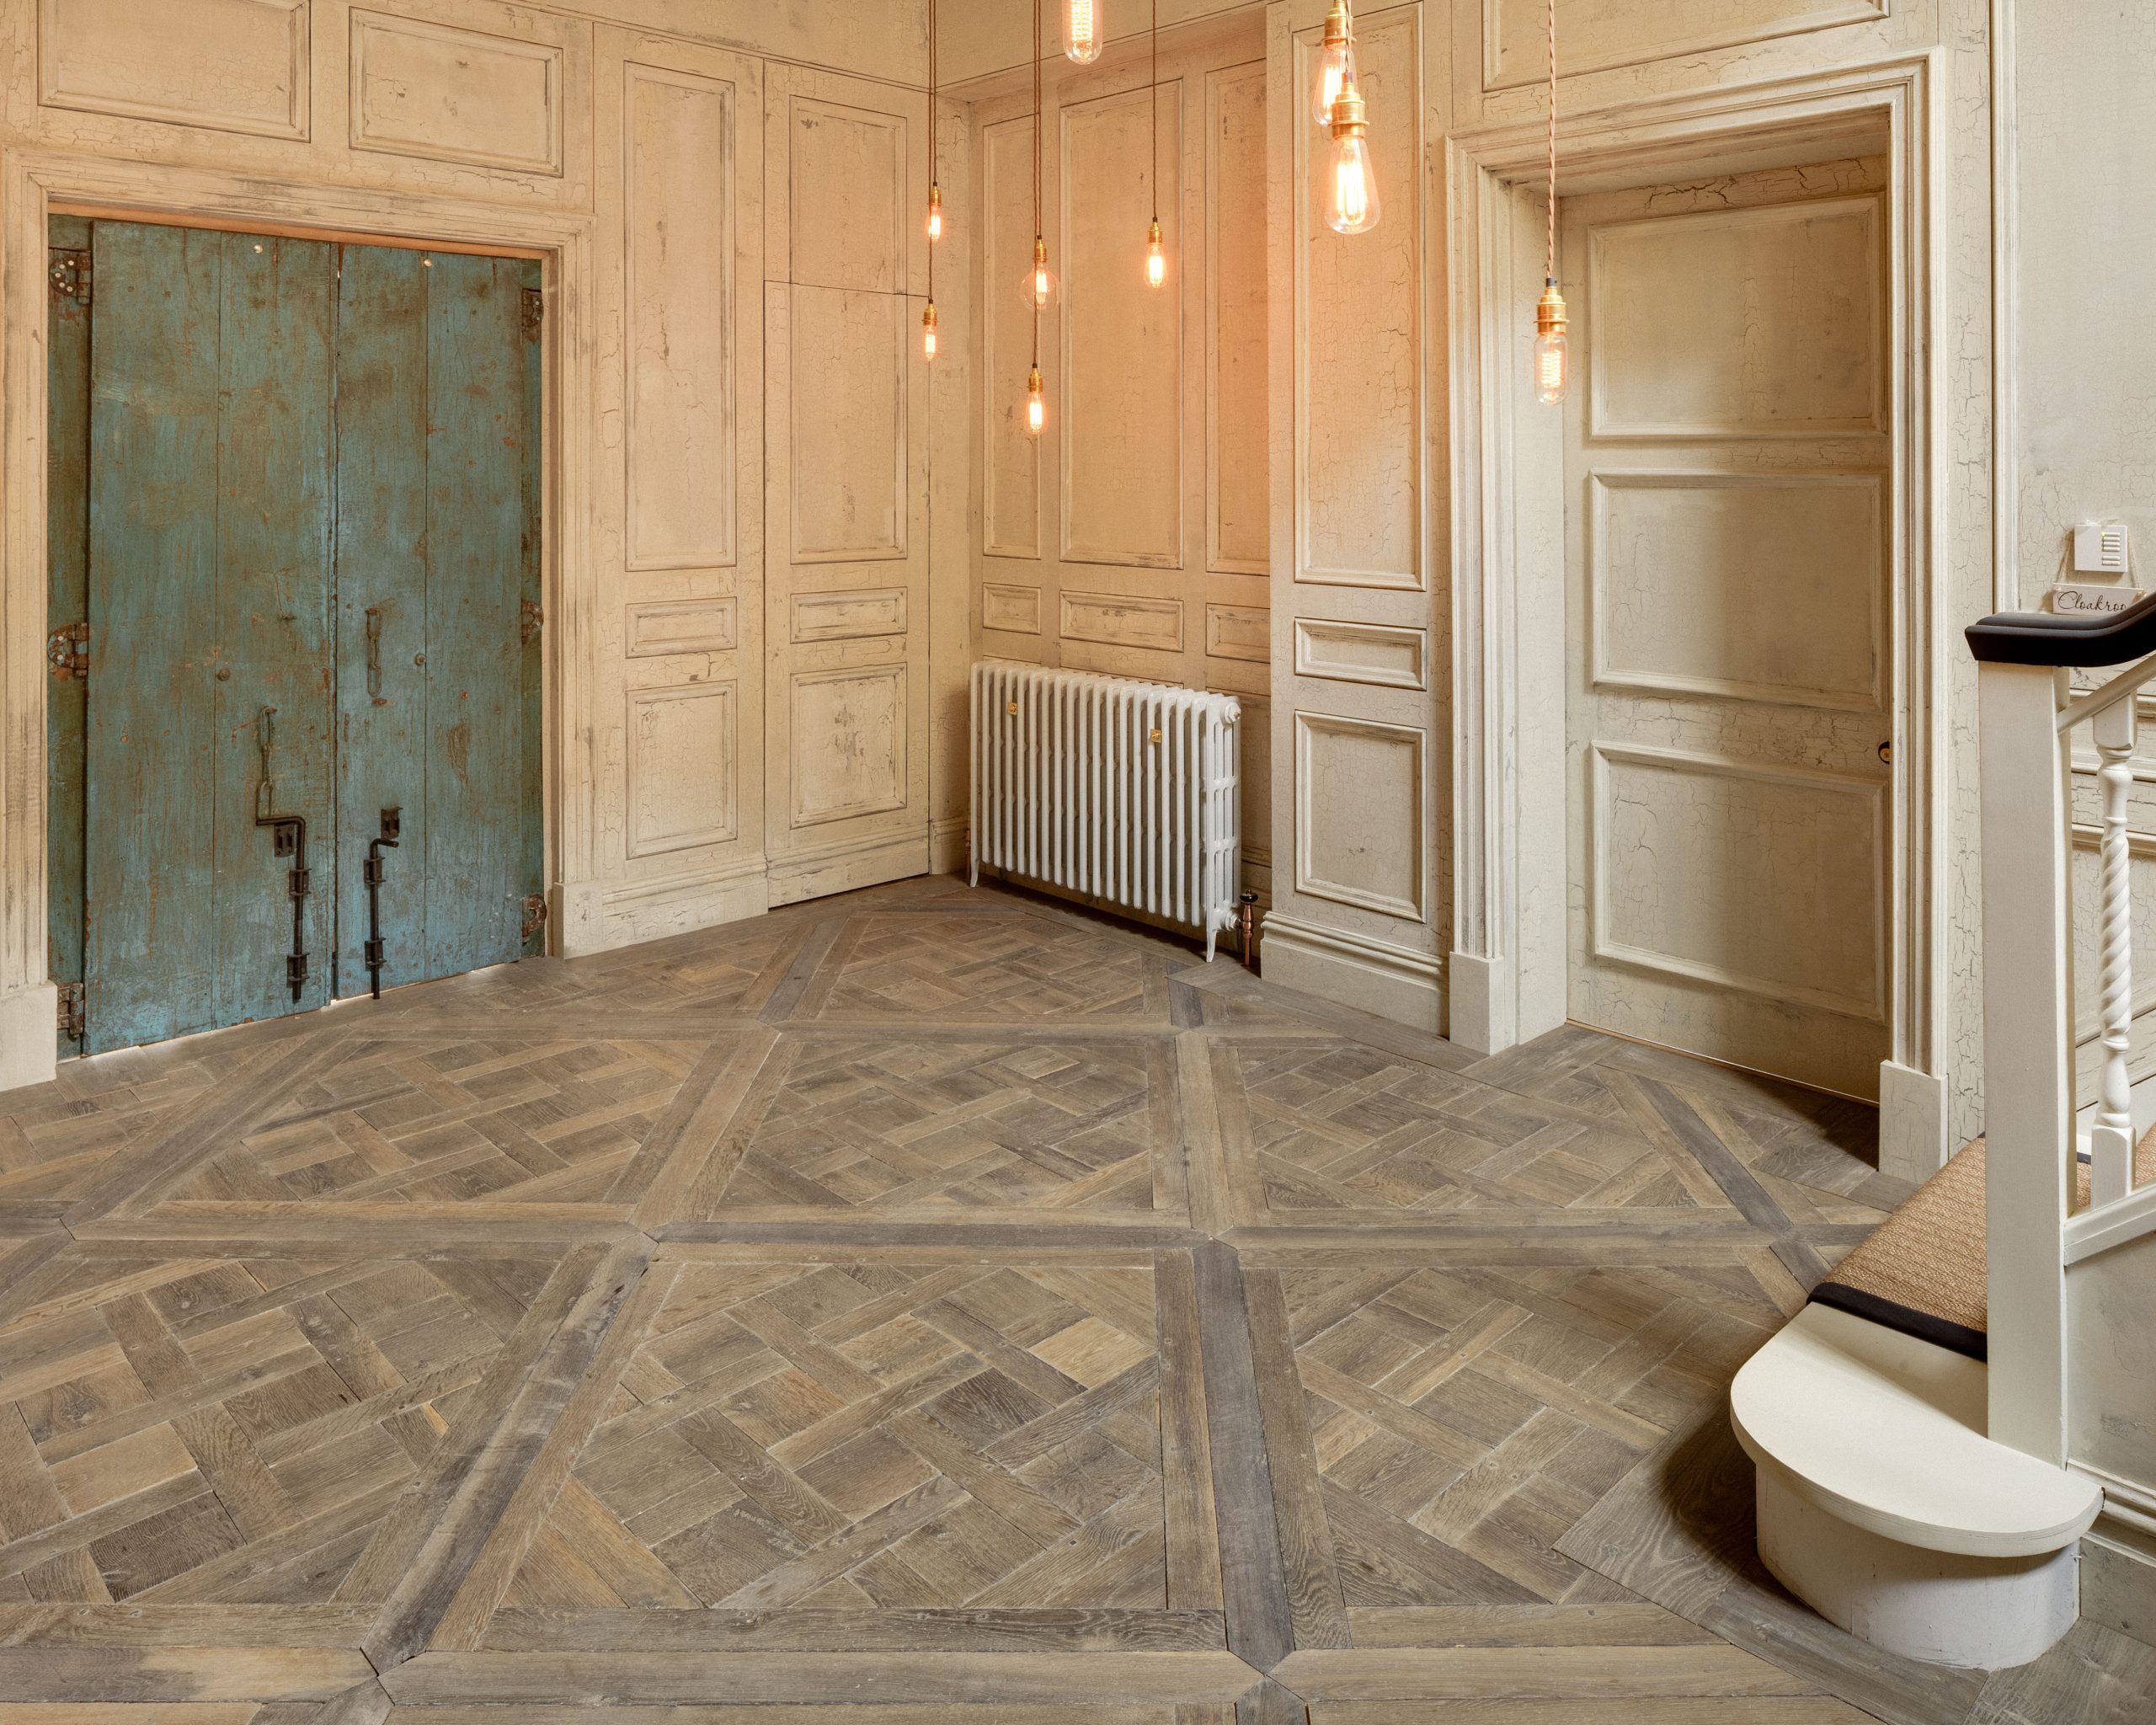 10 Things You Should Know About Before Purchasing Parquet Flooring (2021)